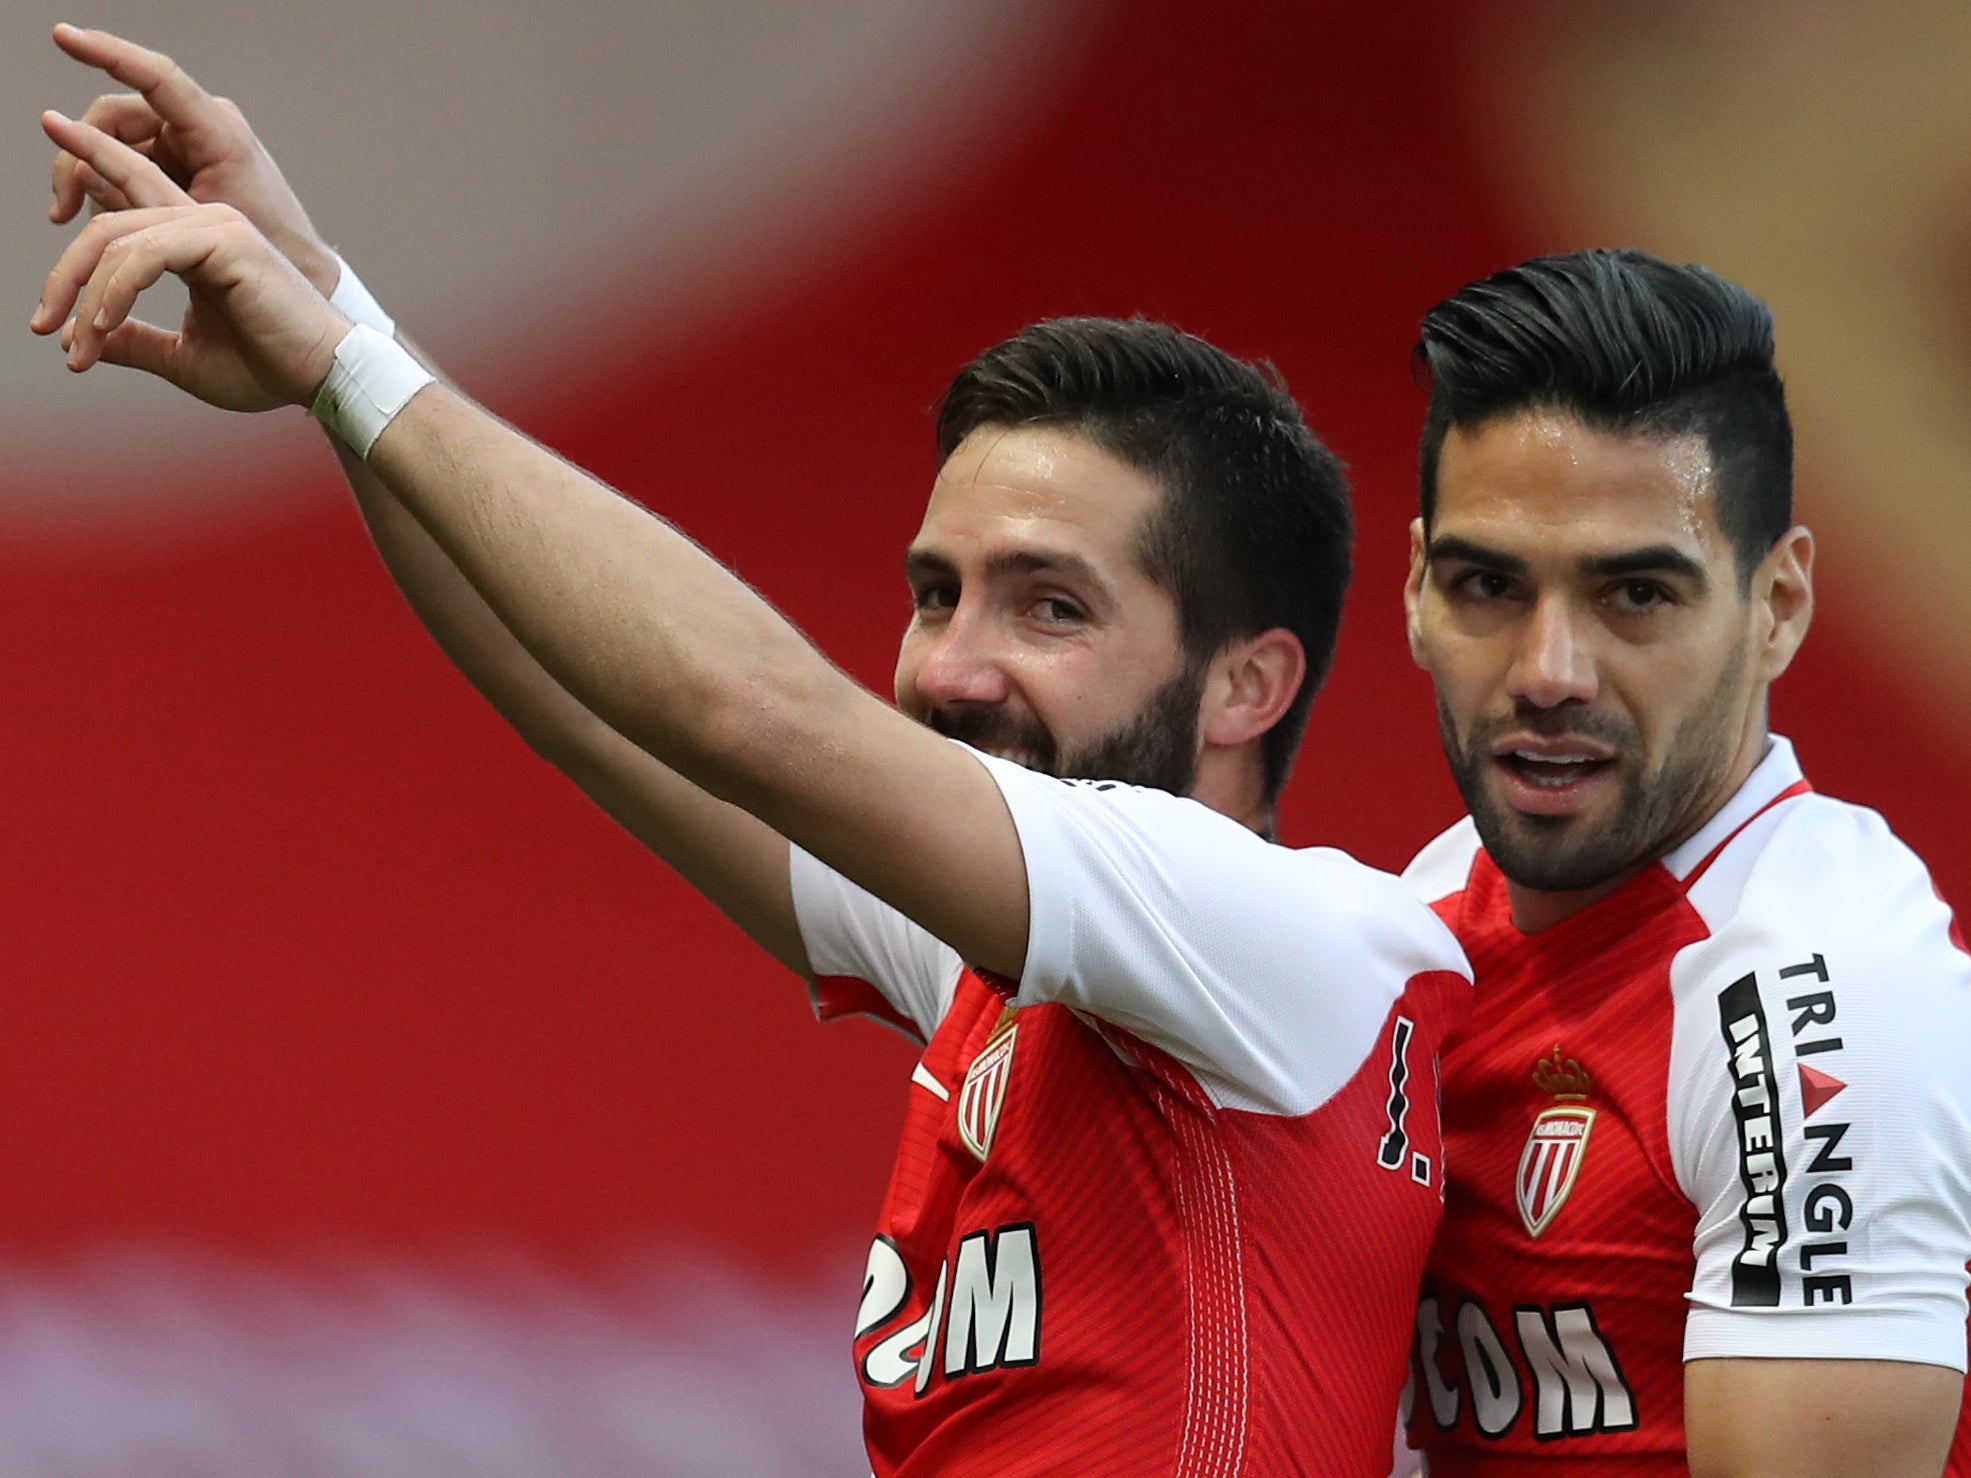 Falcao and Moutinho both arrived in the 2013 transfer window